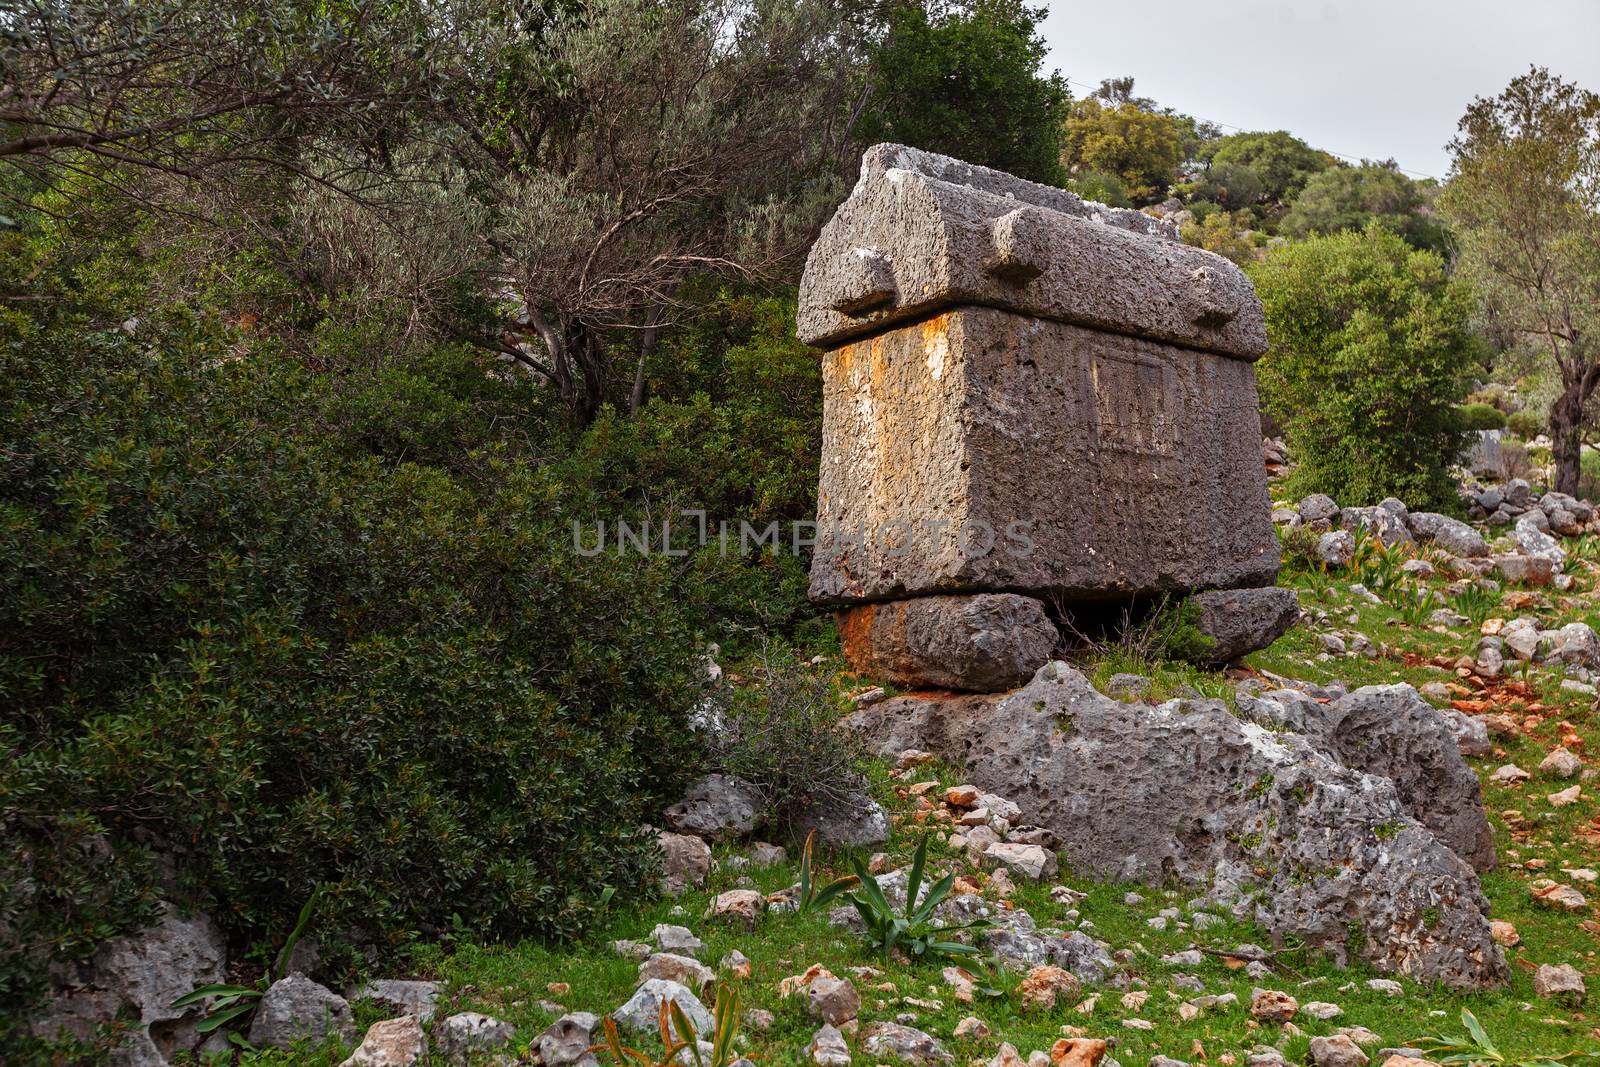 Sarcophagus at the Necropolis of ancient Appolonia.